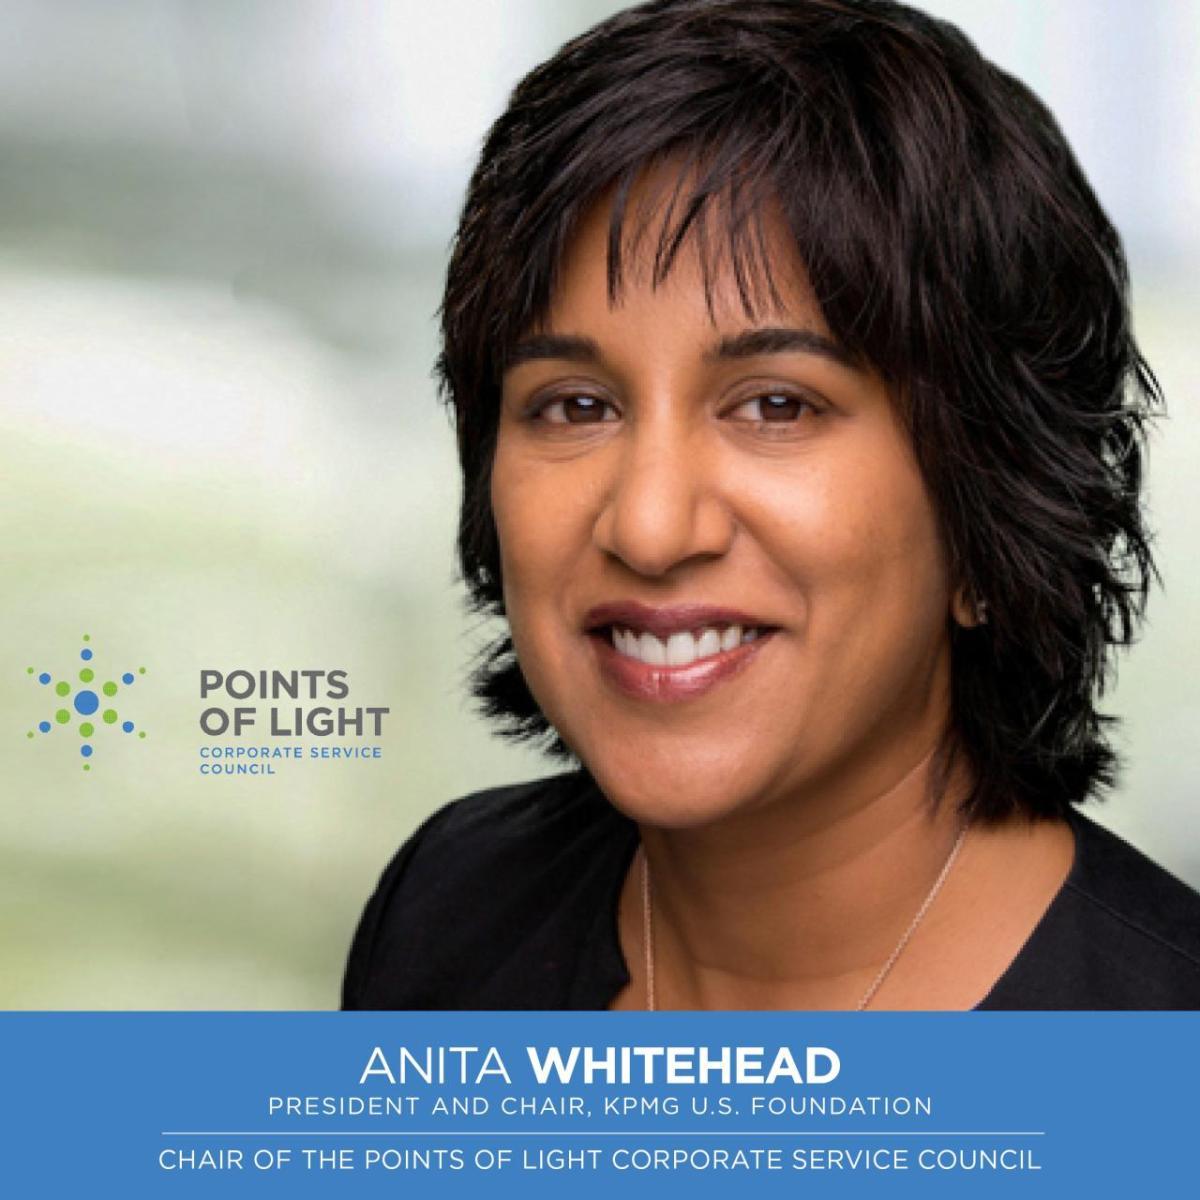 Anita Whitehead, president & chair KPMG U.S. Foundation and chair of the Points of Light Corporate Service Council